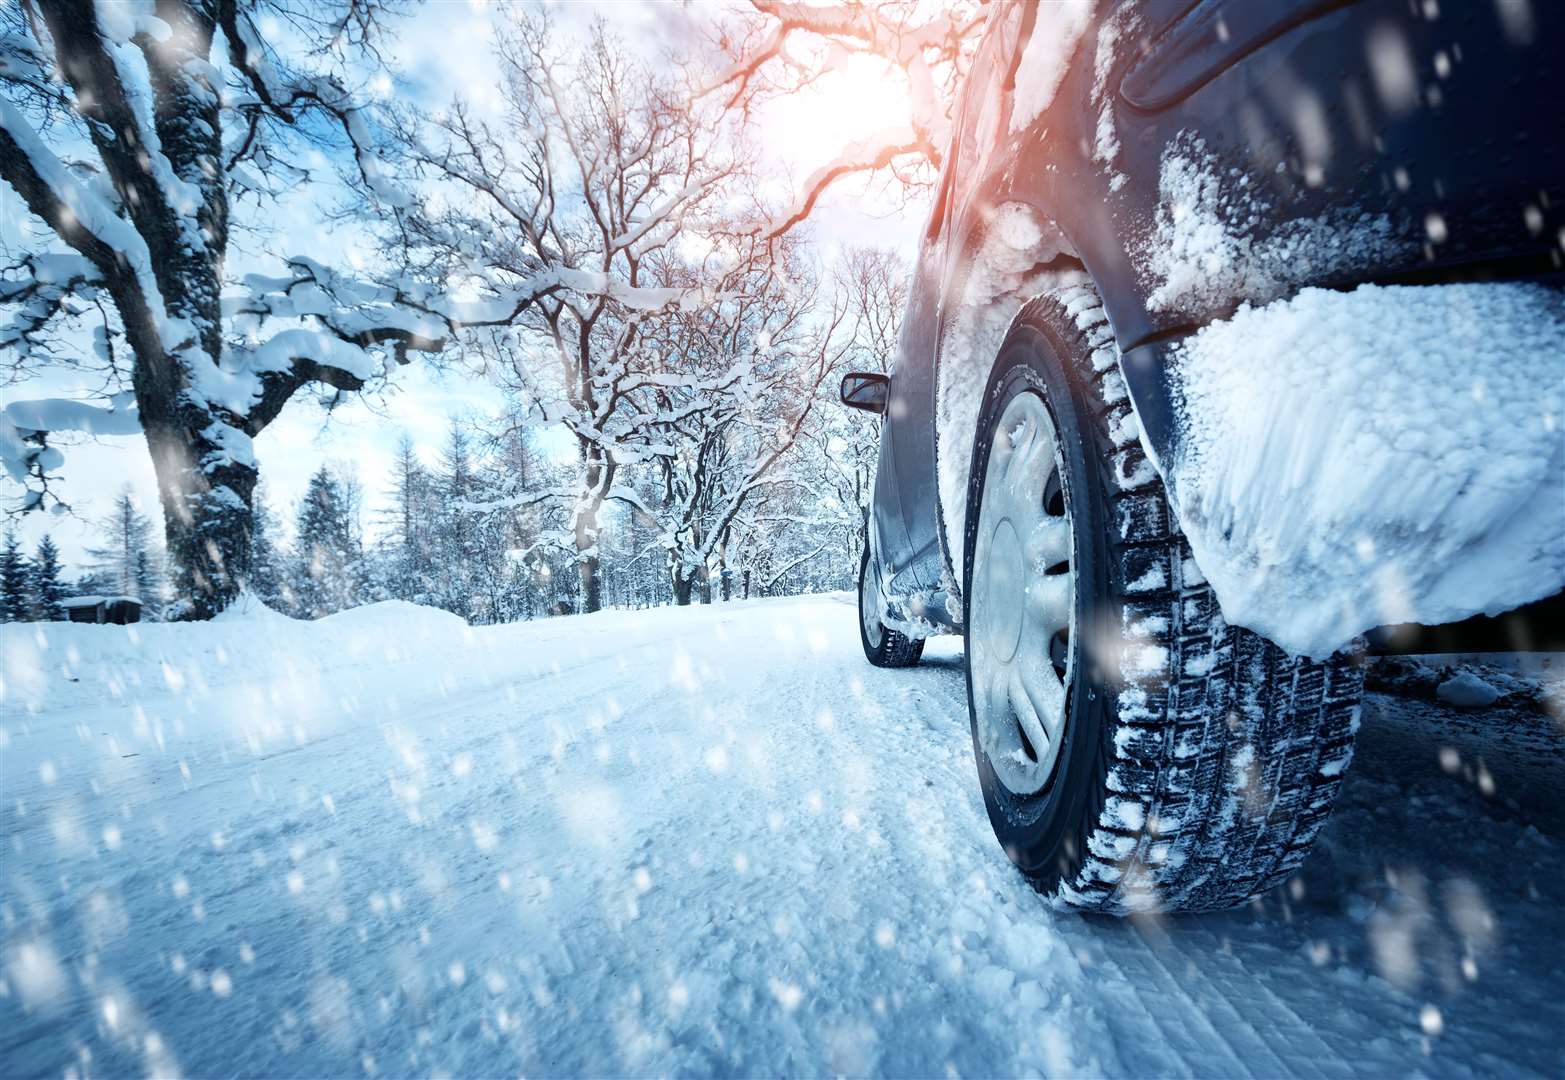 Some simple precautions can help keep drivers safe on winter roads.